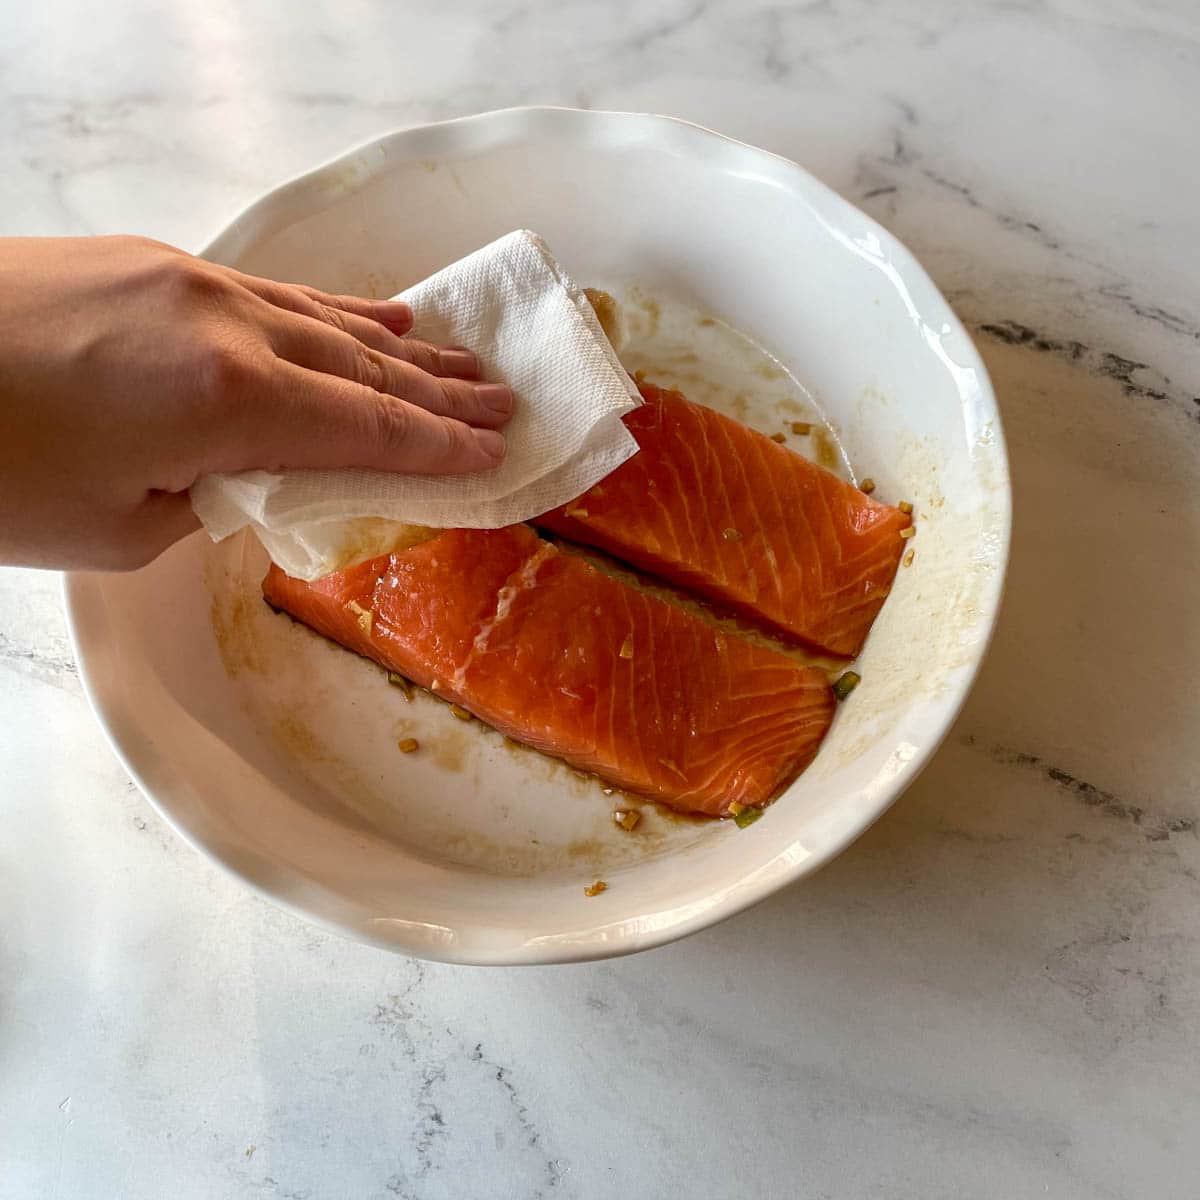 Two salmon fillets are blotted dry.